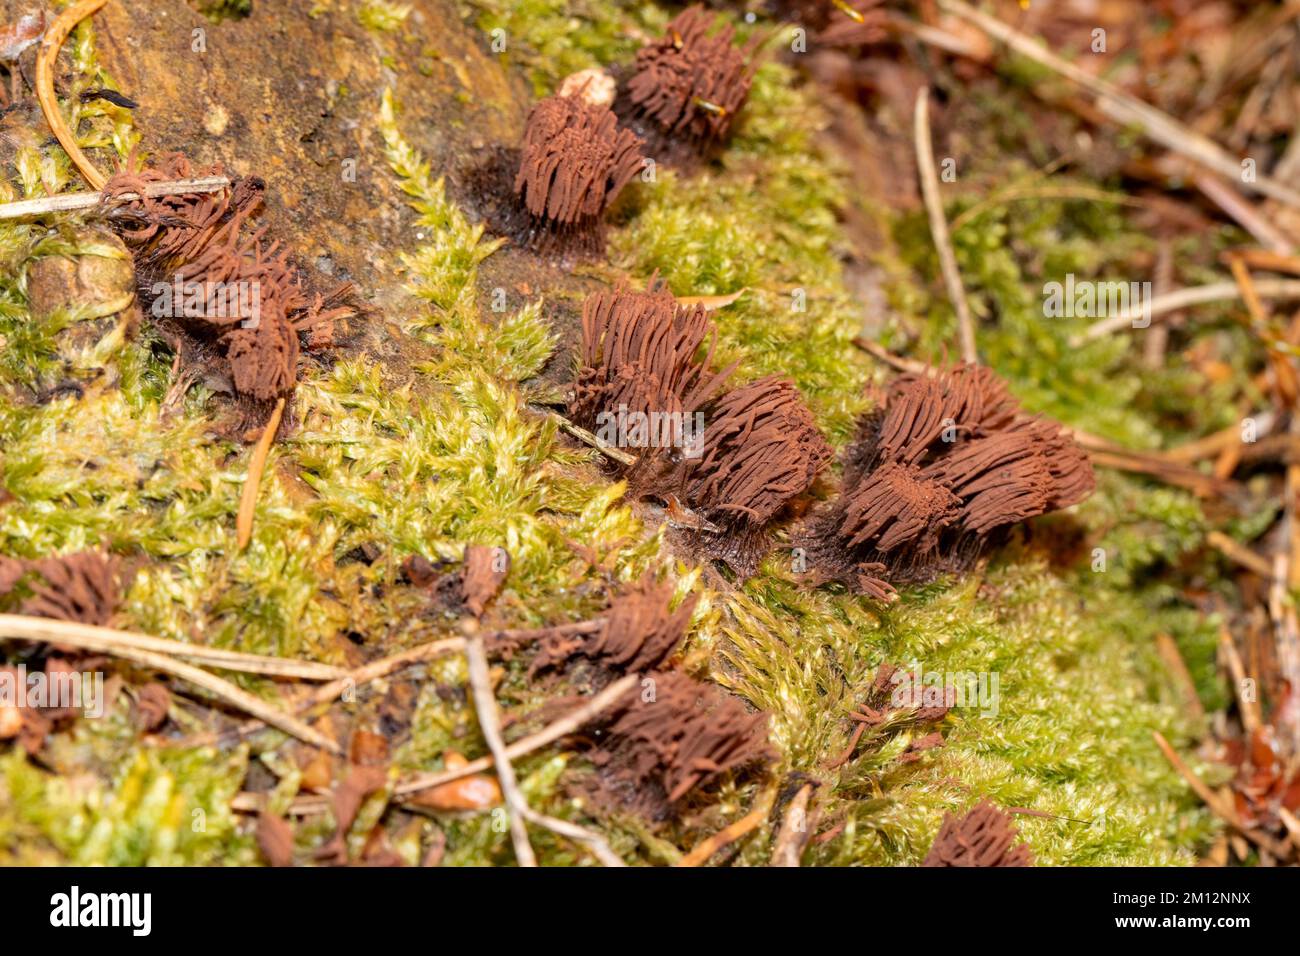 Tufted slime mould several fruiting bodies with many light brown stalks on green moss Stock Photo